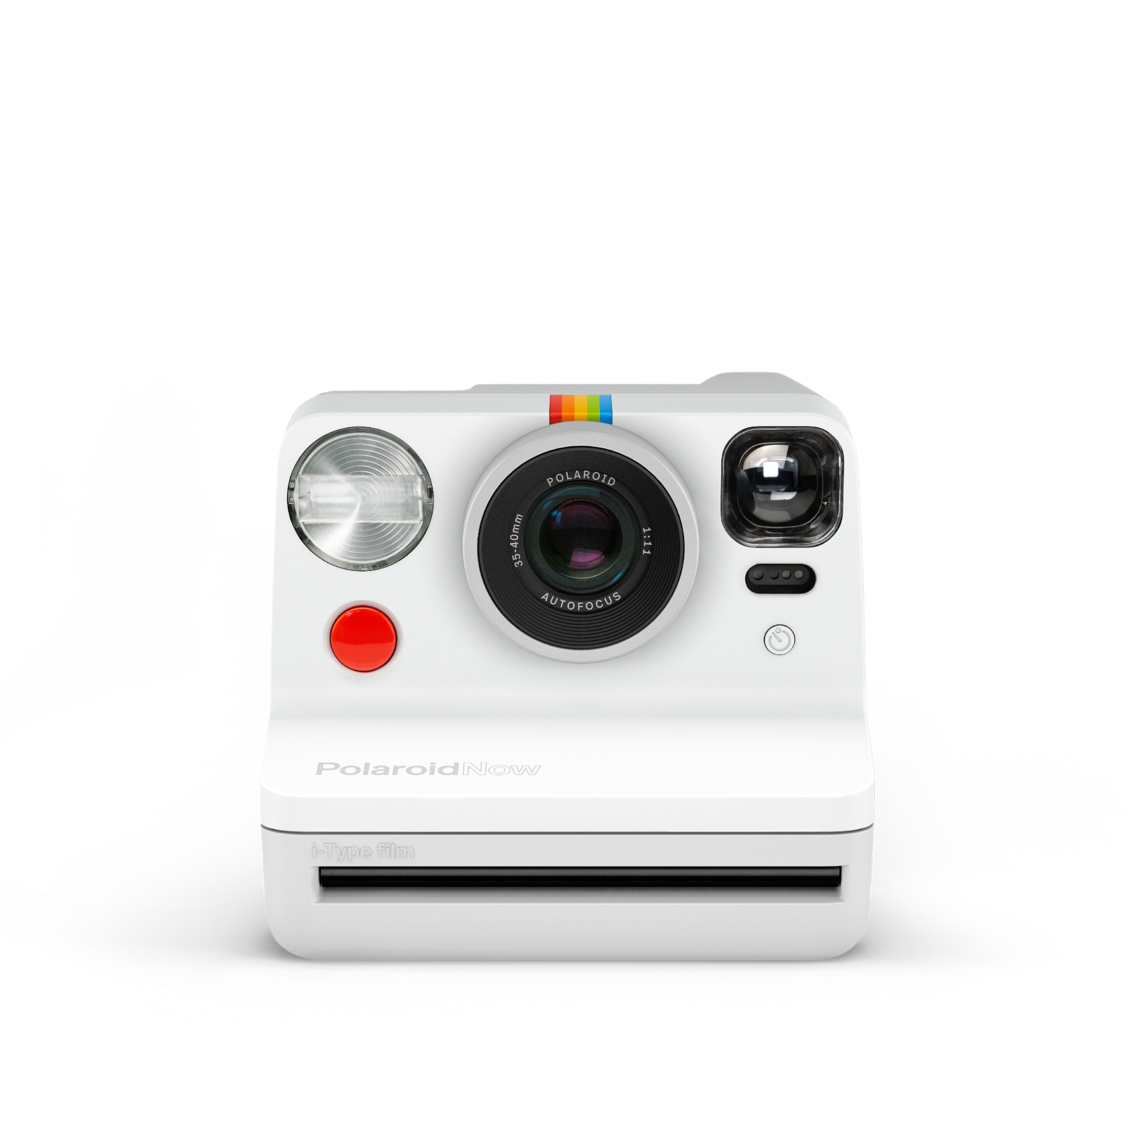 now_white-polaroid-camera_009027_front-tilted_76818978-1bc2-45b2-a1f0-b5598abe1d3d_1136x (1).png